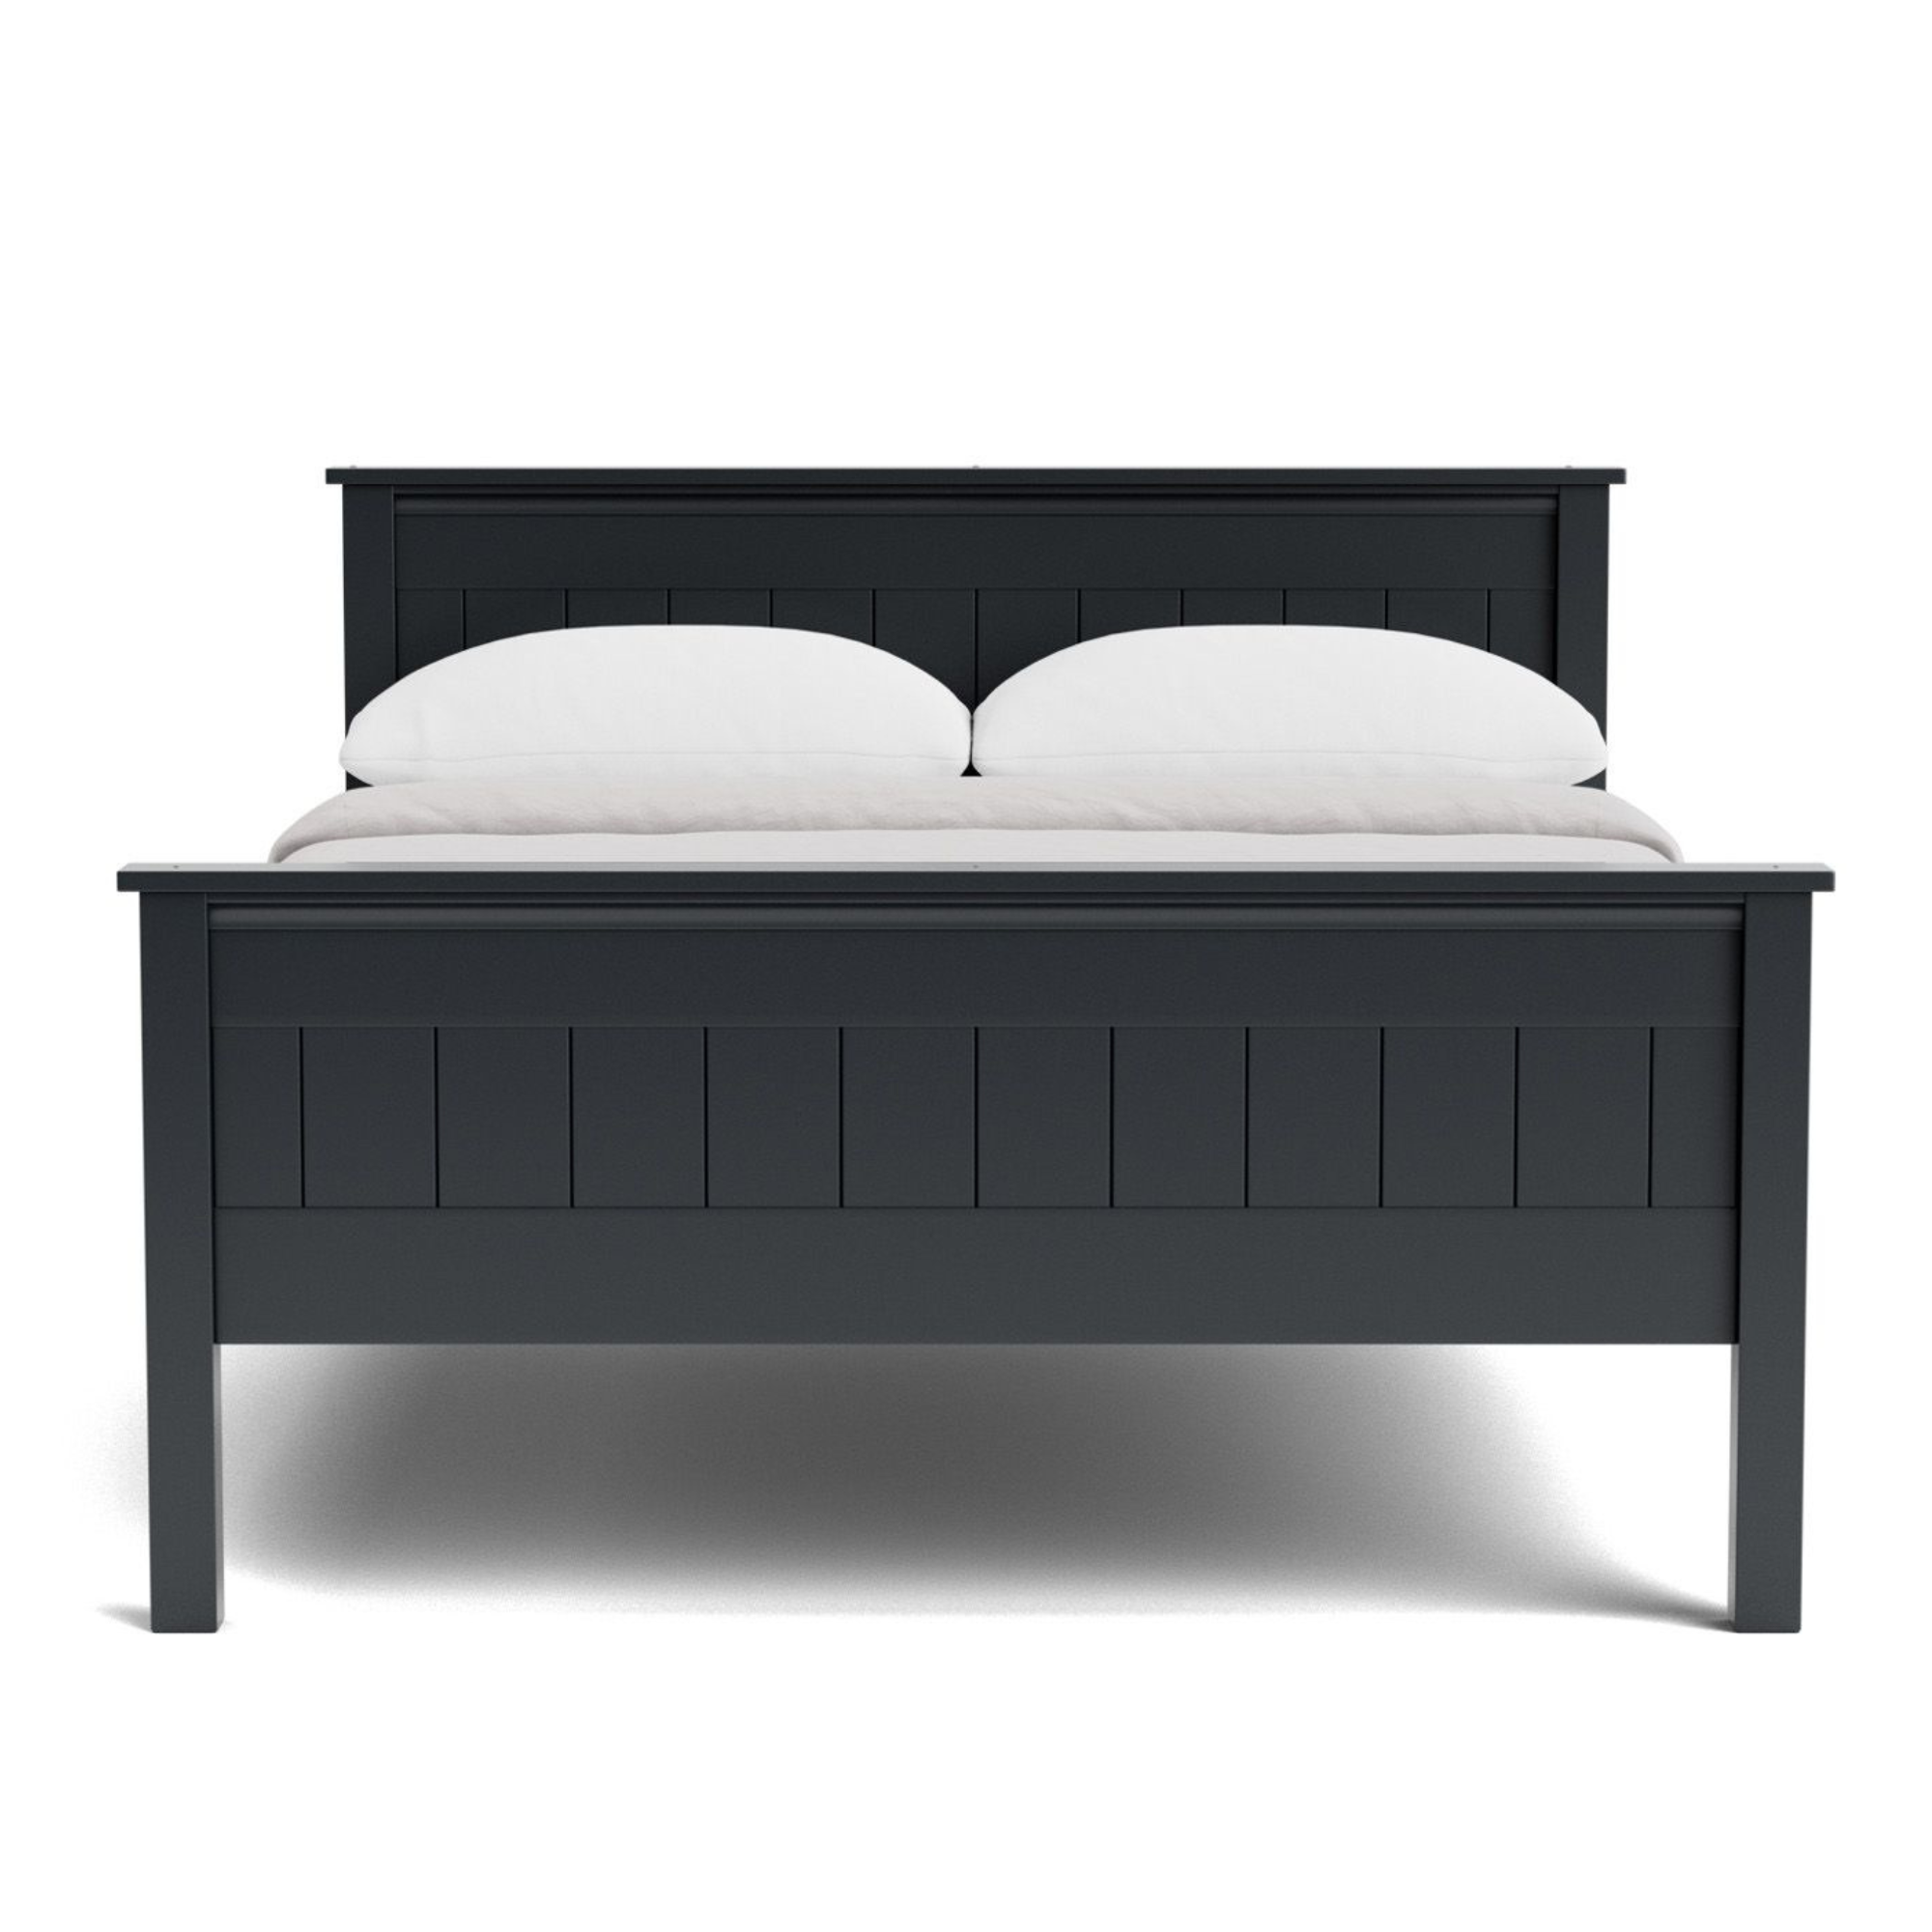 HILTON HIGH FOOT SLAT BED | ALL SIZES | NZ MADE